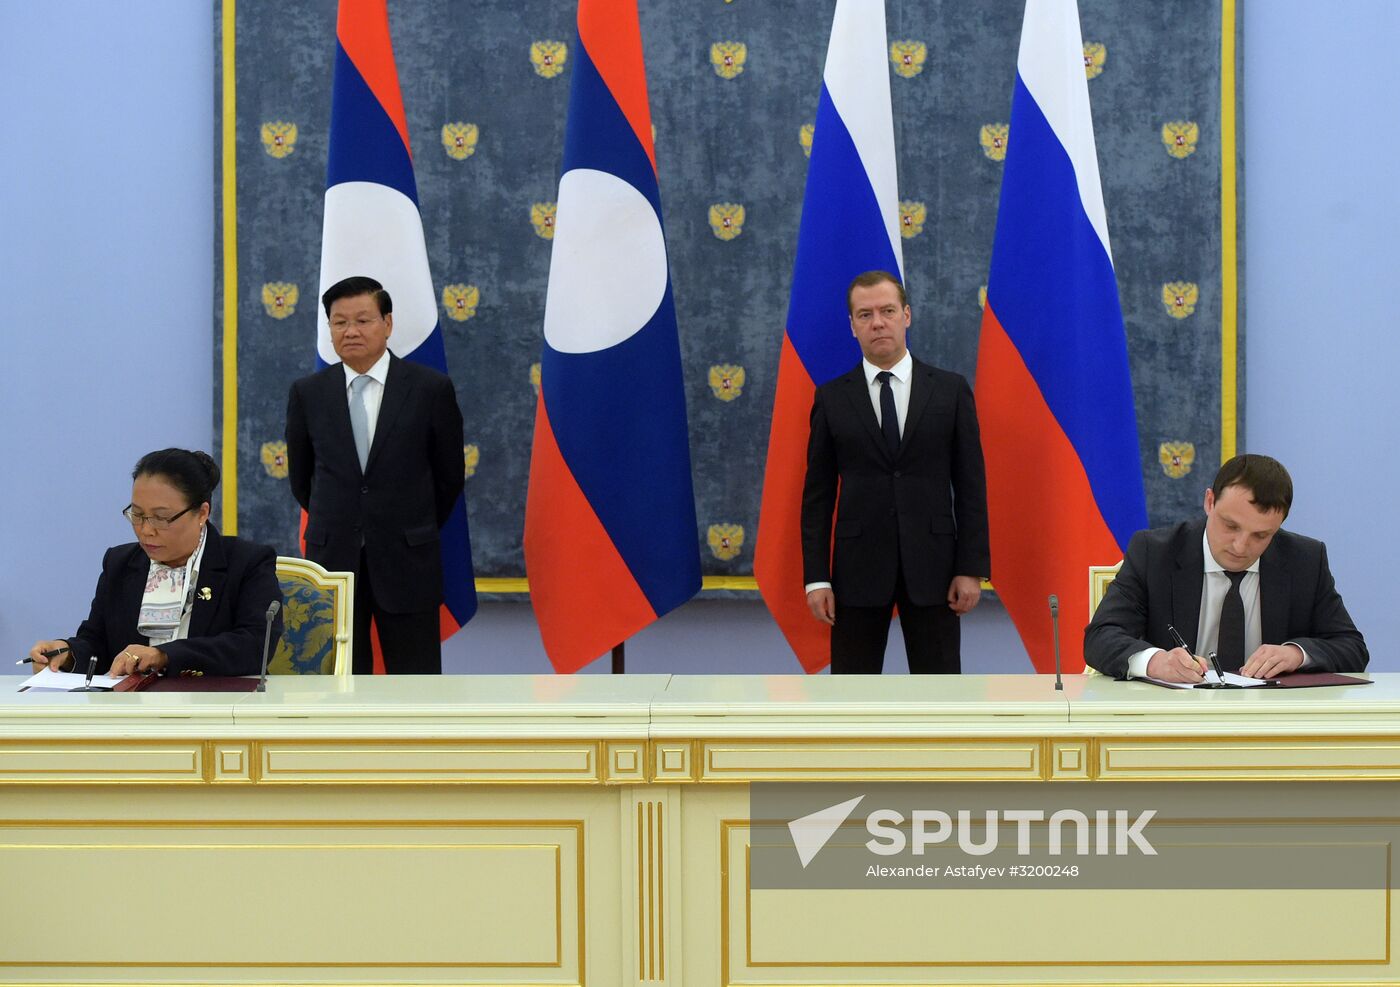 Russian Prime Minister Dmitry Medvedev meets with Prime Minister of Laos Thongloun Sisoulith